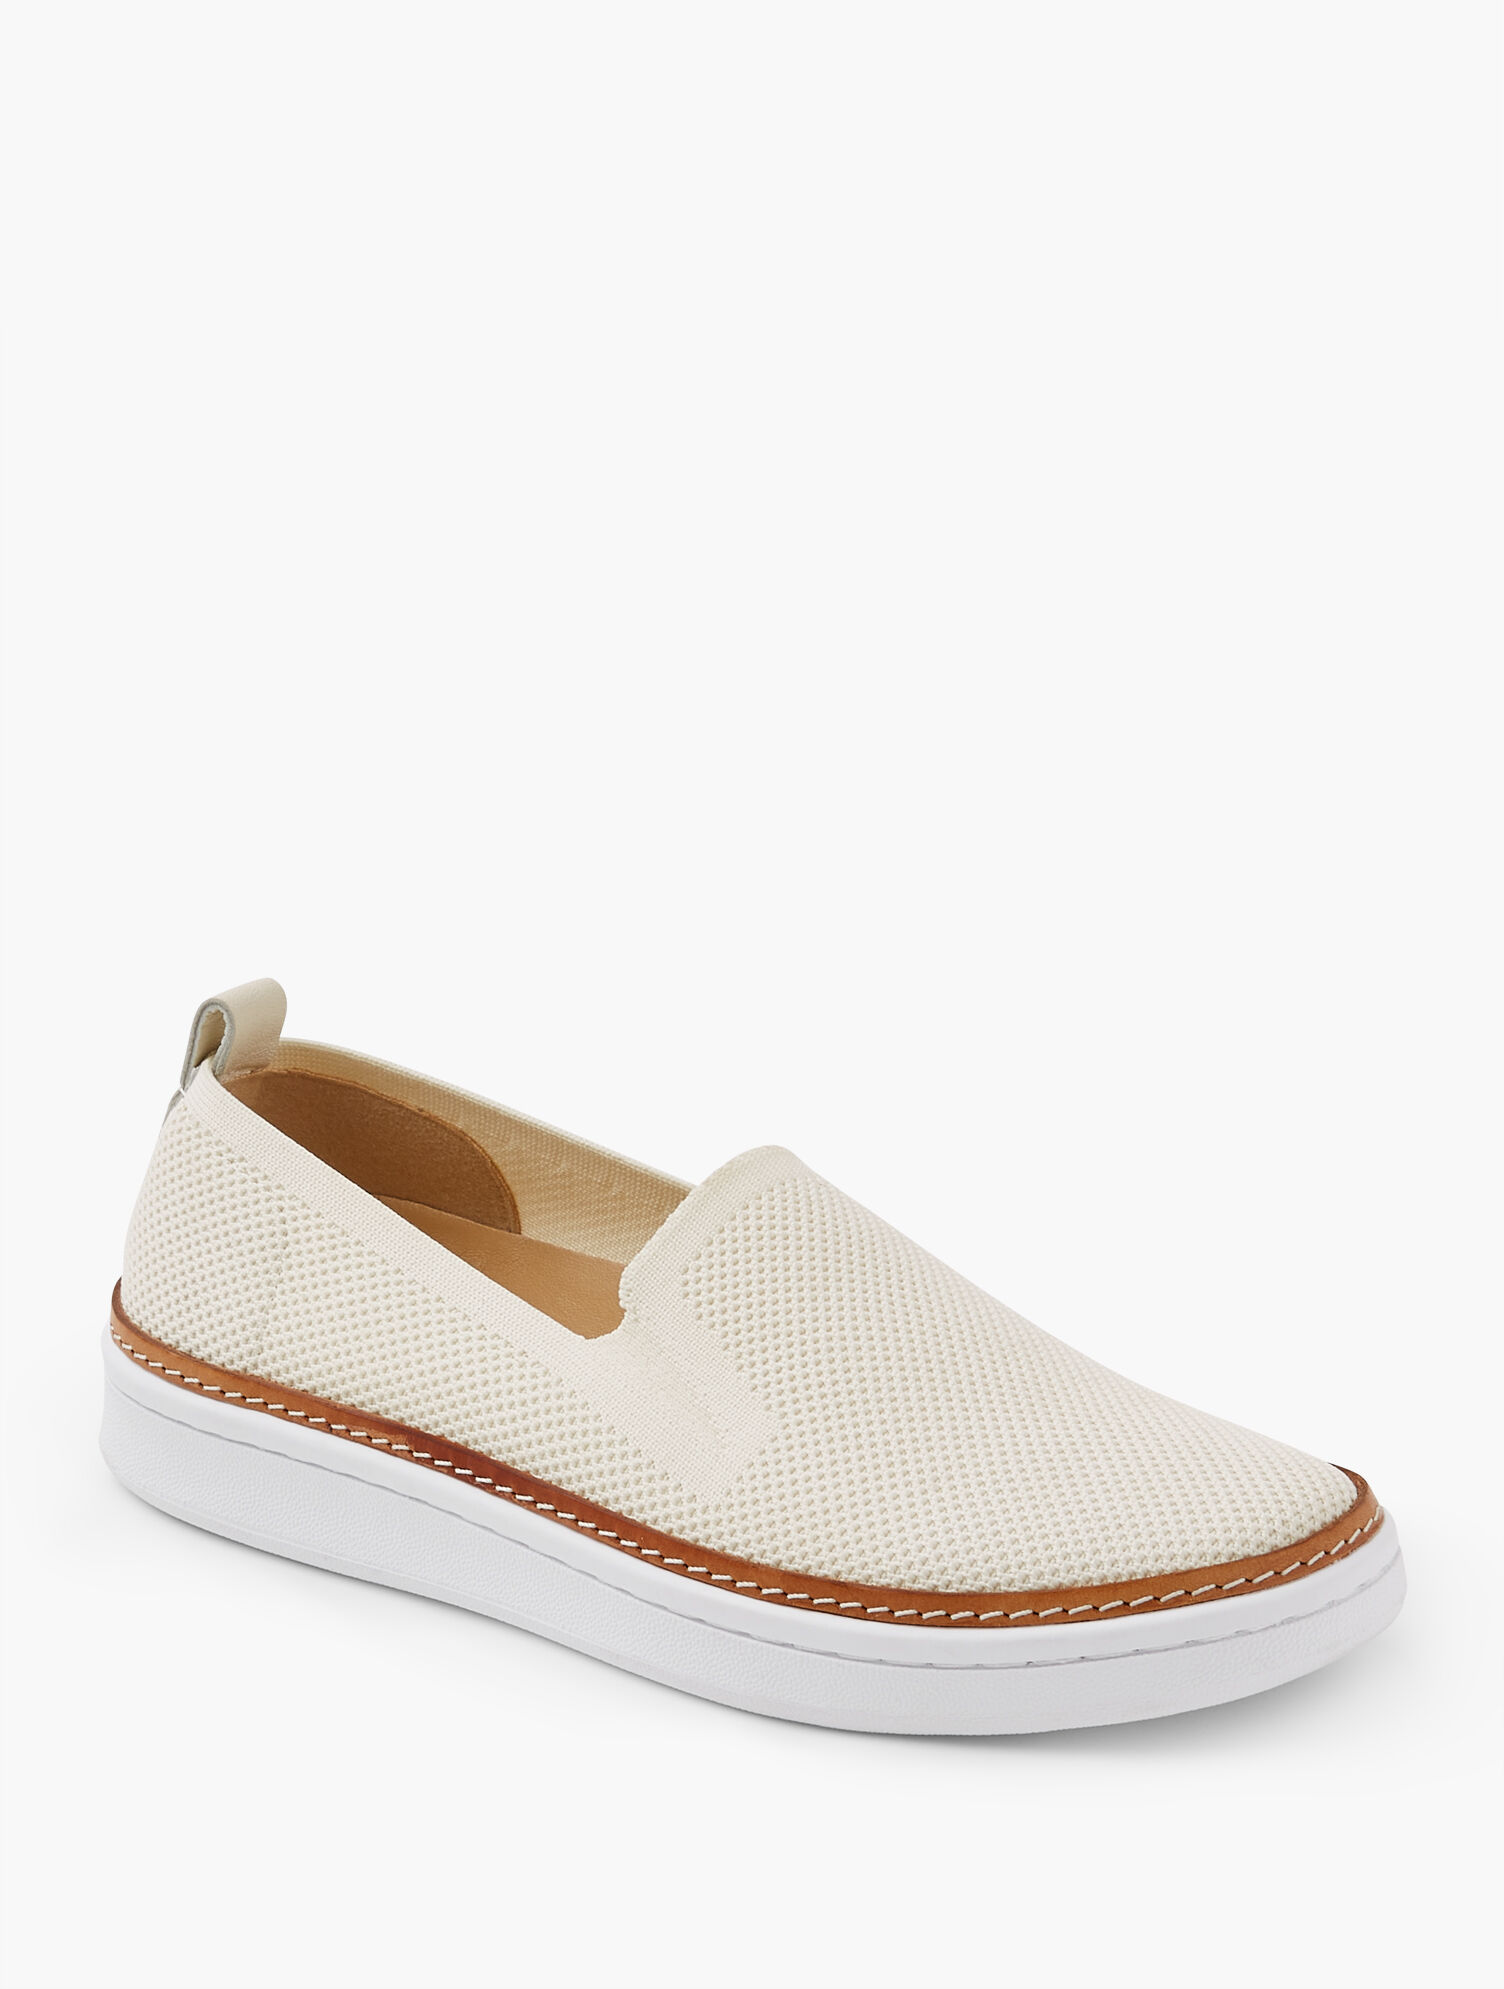 Talbots Brittany Knit Slip-On Sneakers